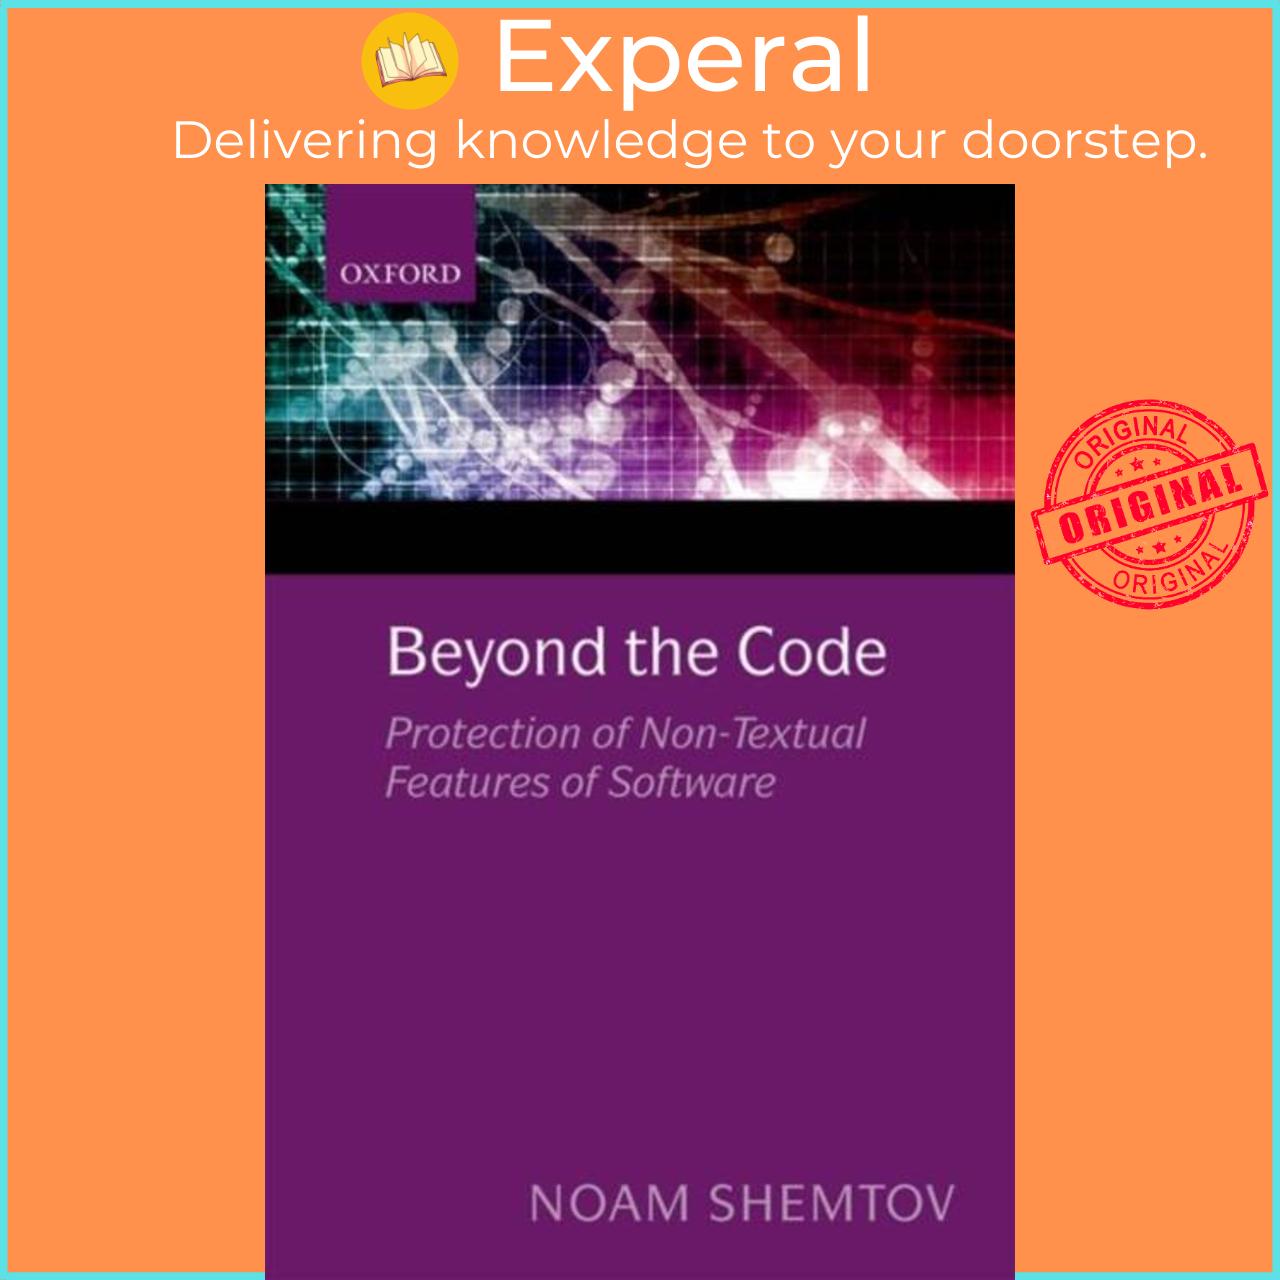 Sách - Beyond the Code - Protection of Non-Textual Features of Software by Noam Shemtov (UK edition, hardcover)